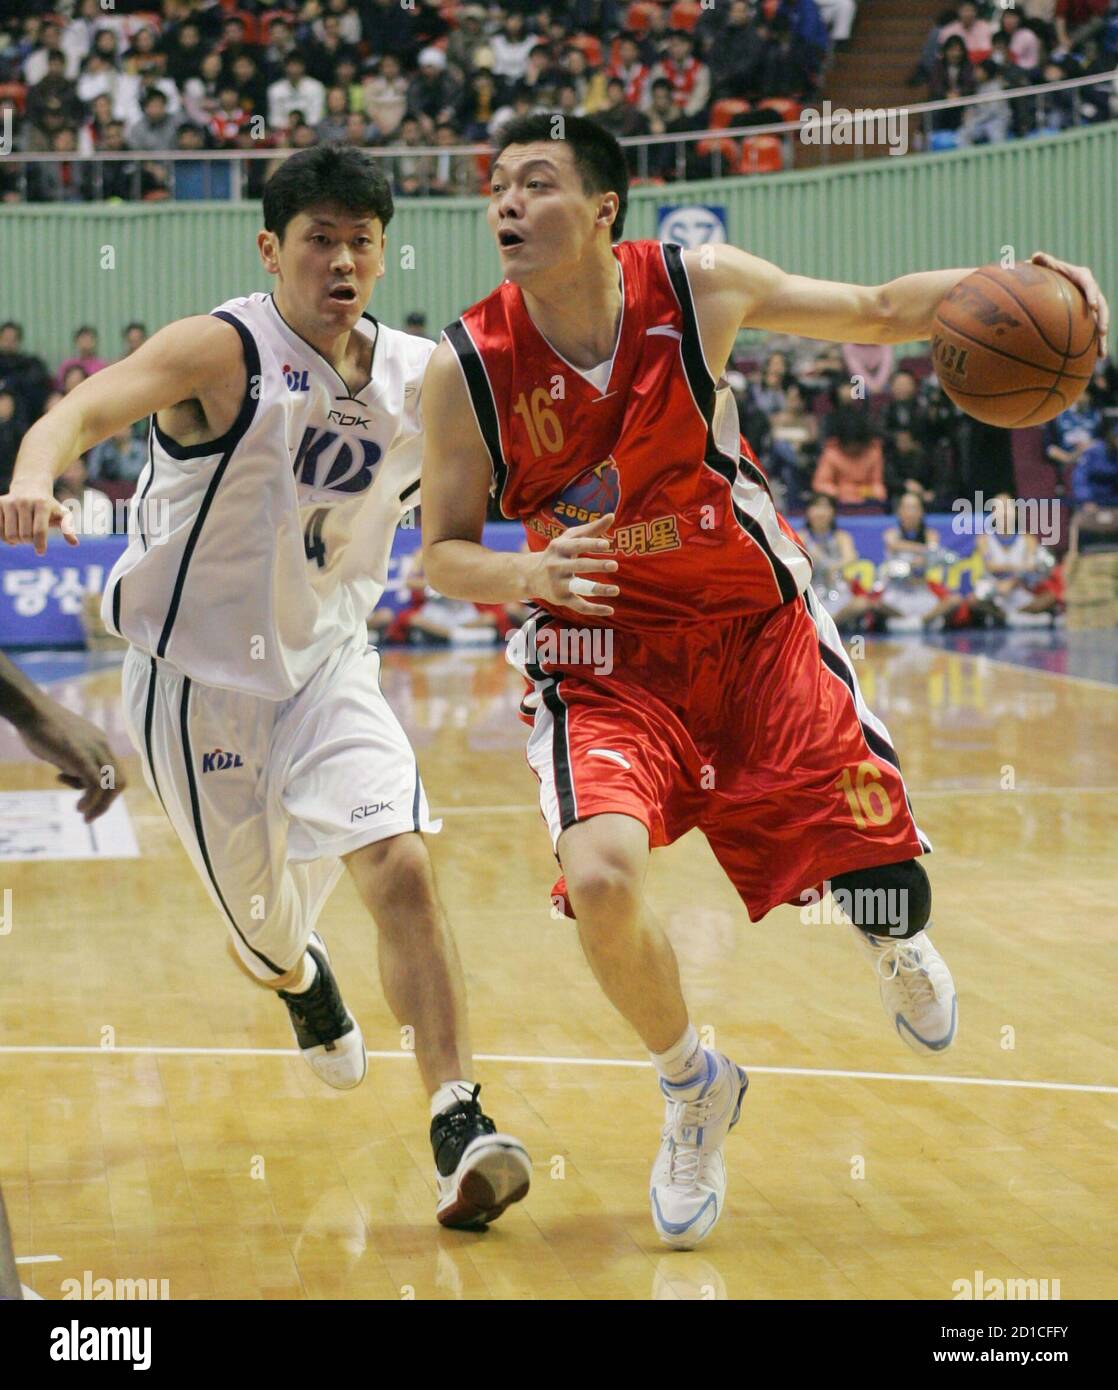 Zhang Cheng (R) from China's Continental Basketball Association (CBA)  drives the ball past Choo Seung-gyun from South Korea's Korean Basketball  League (KBL) during the All-Star team friendly basketball match in Seoul  January